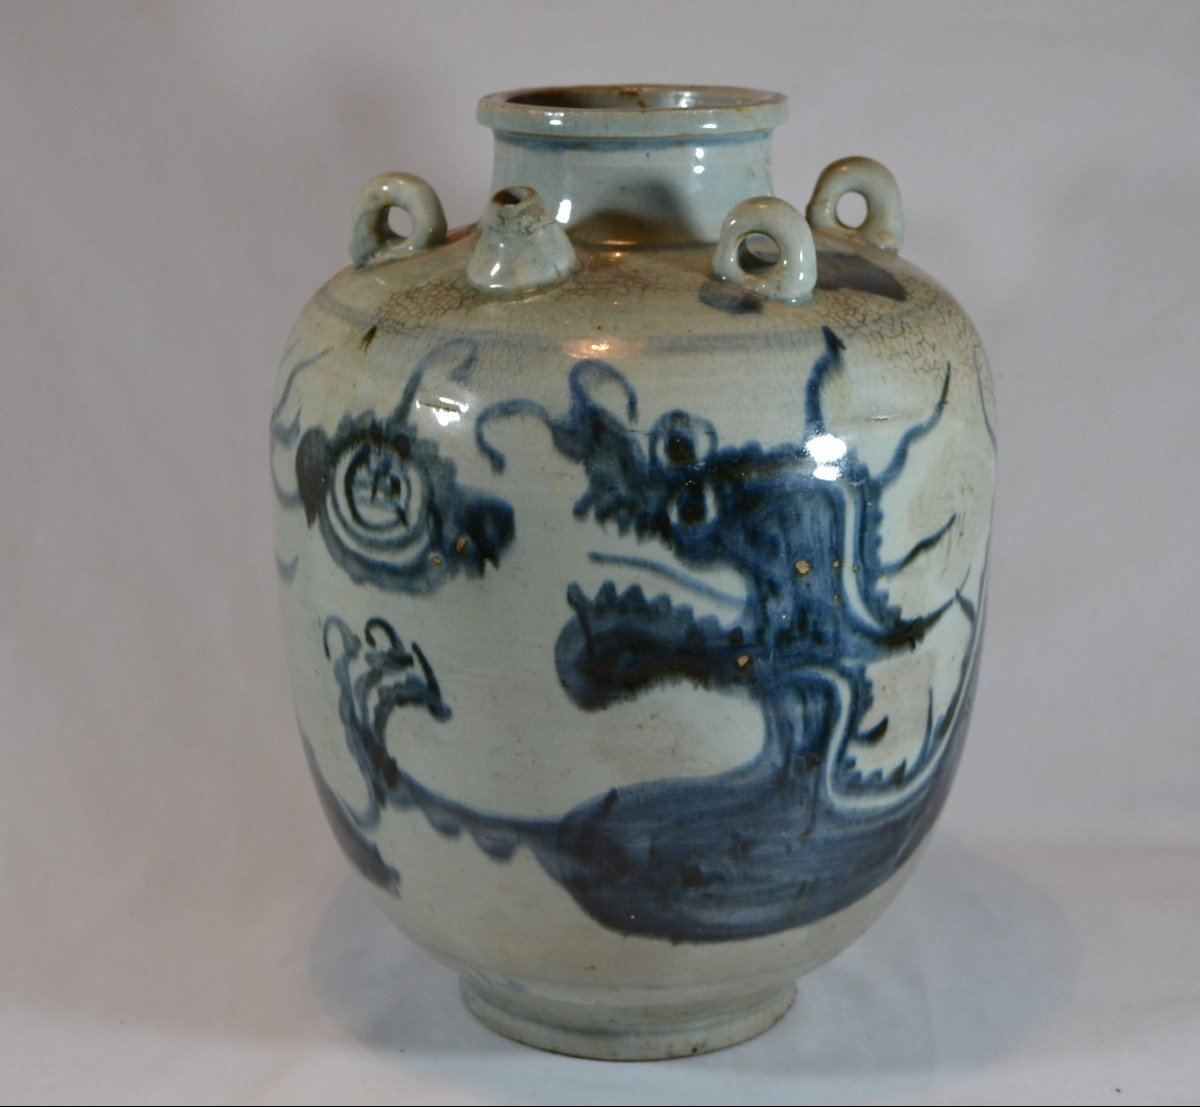 Porcelain Ewer. Dragon Decor In Cobalt Blue. China Ming Period, 17° Or Before. 